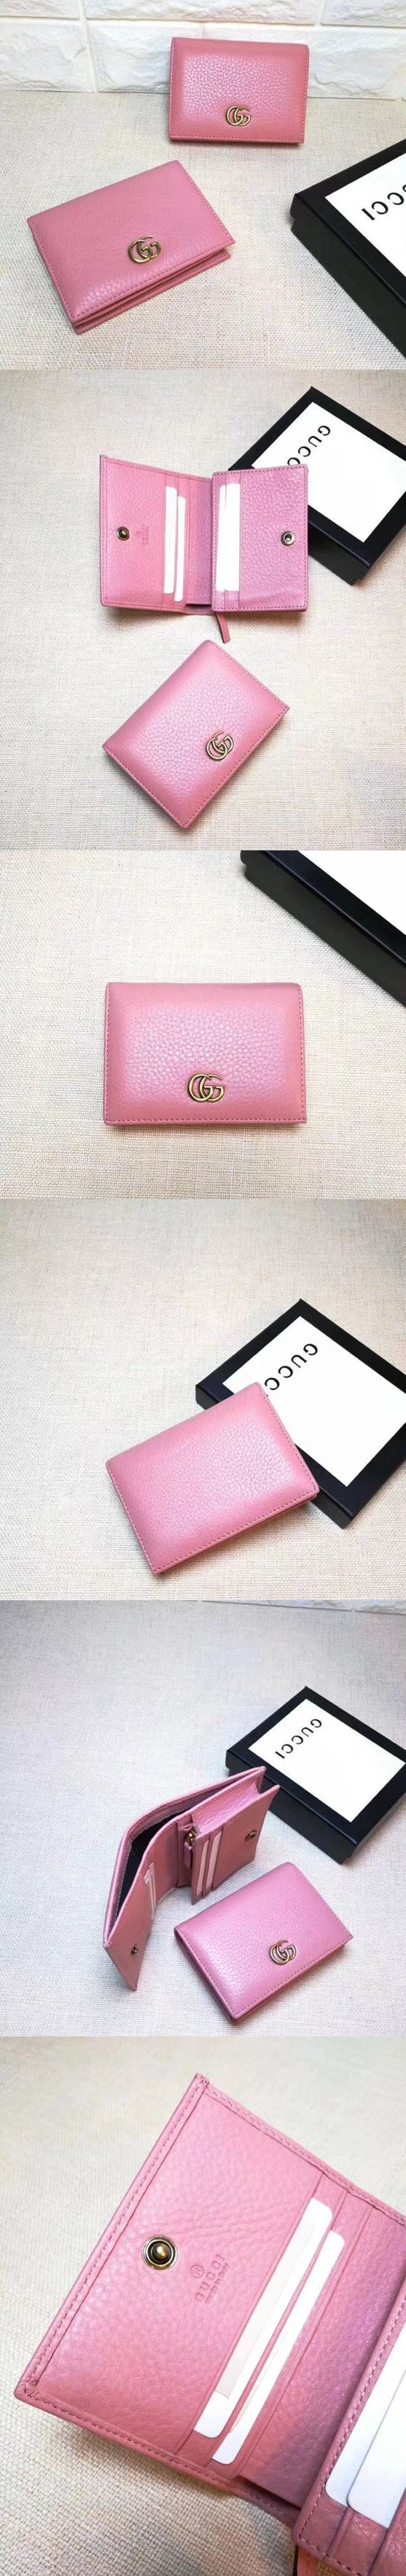 Replica Gucci 456126 Leather card case Wallets Pink